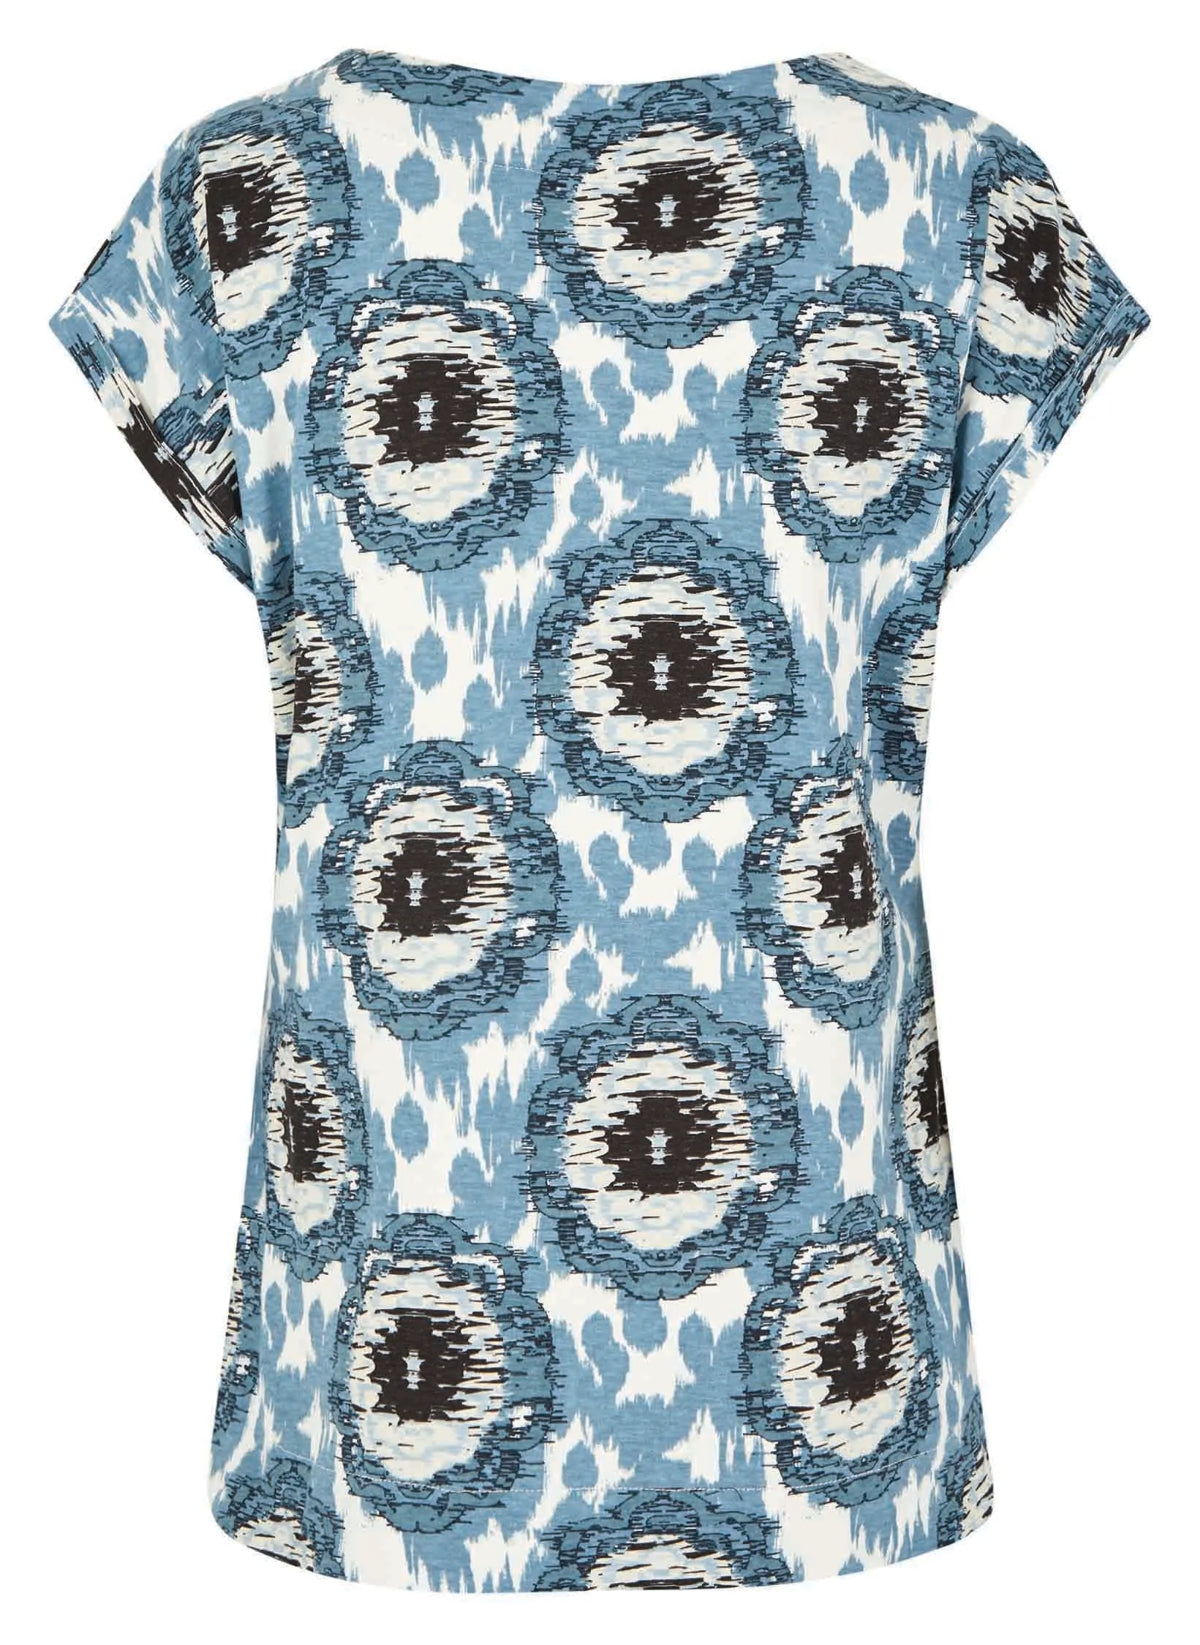 Weird Fish women's Paw Paw short sleeve t-shirt with a pale denim blue with a unique circular print.